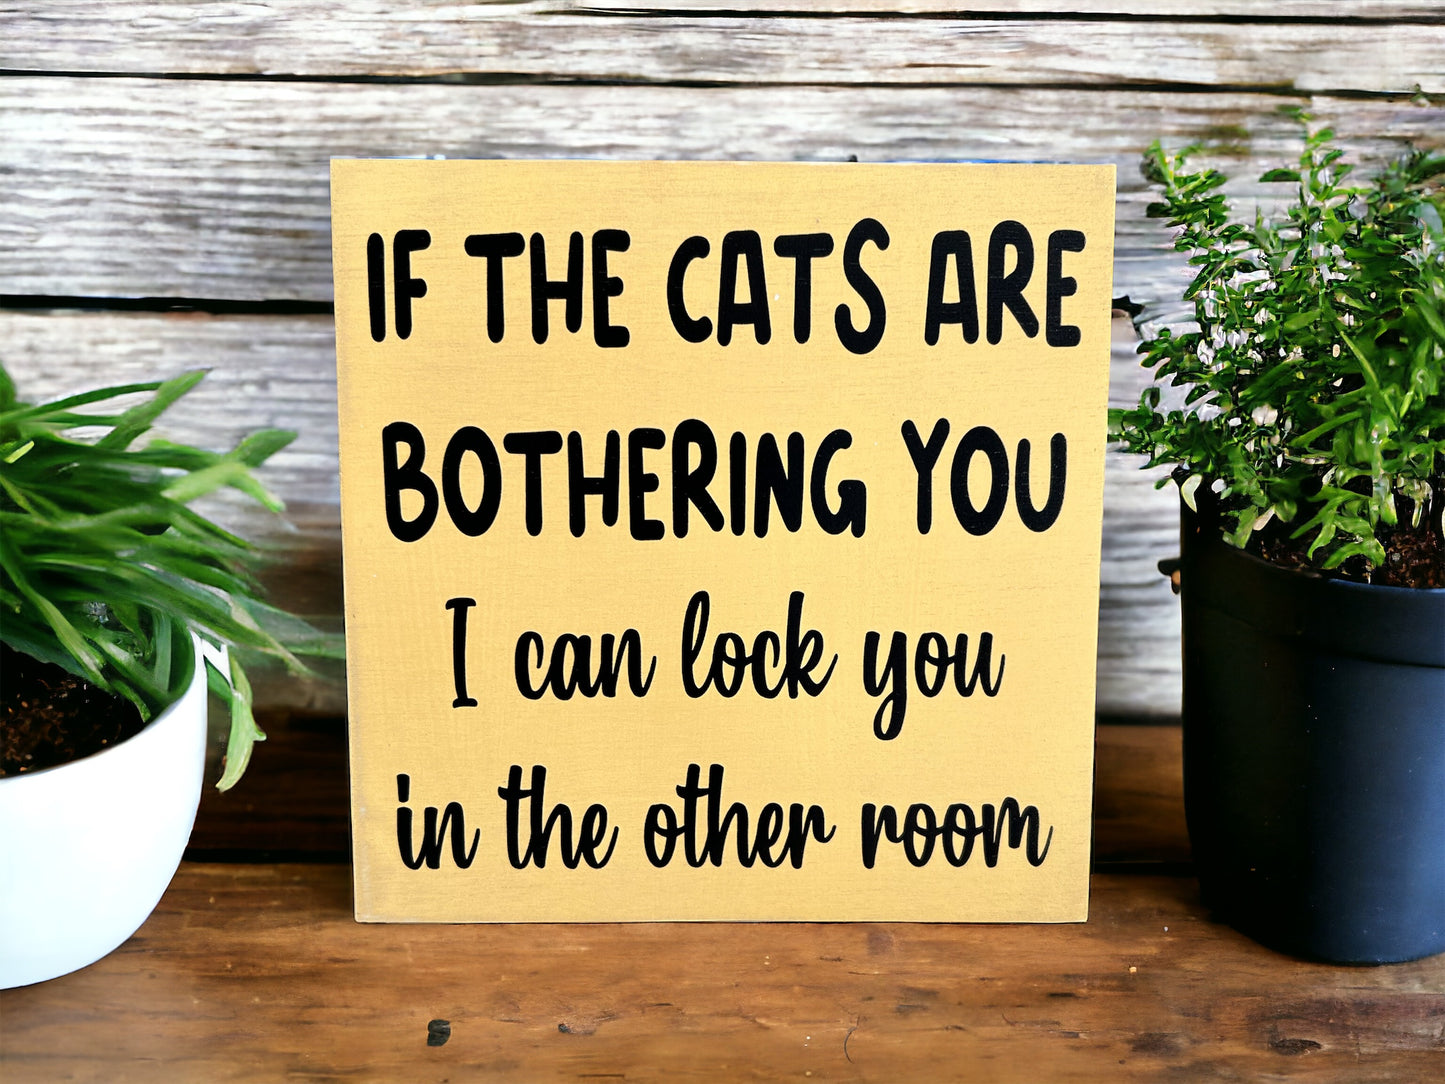 If the Cats are Bothering You - Funny Rustic Wood Sign